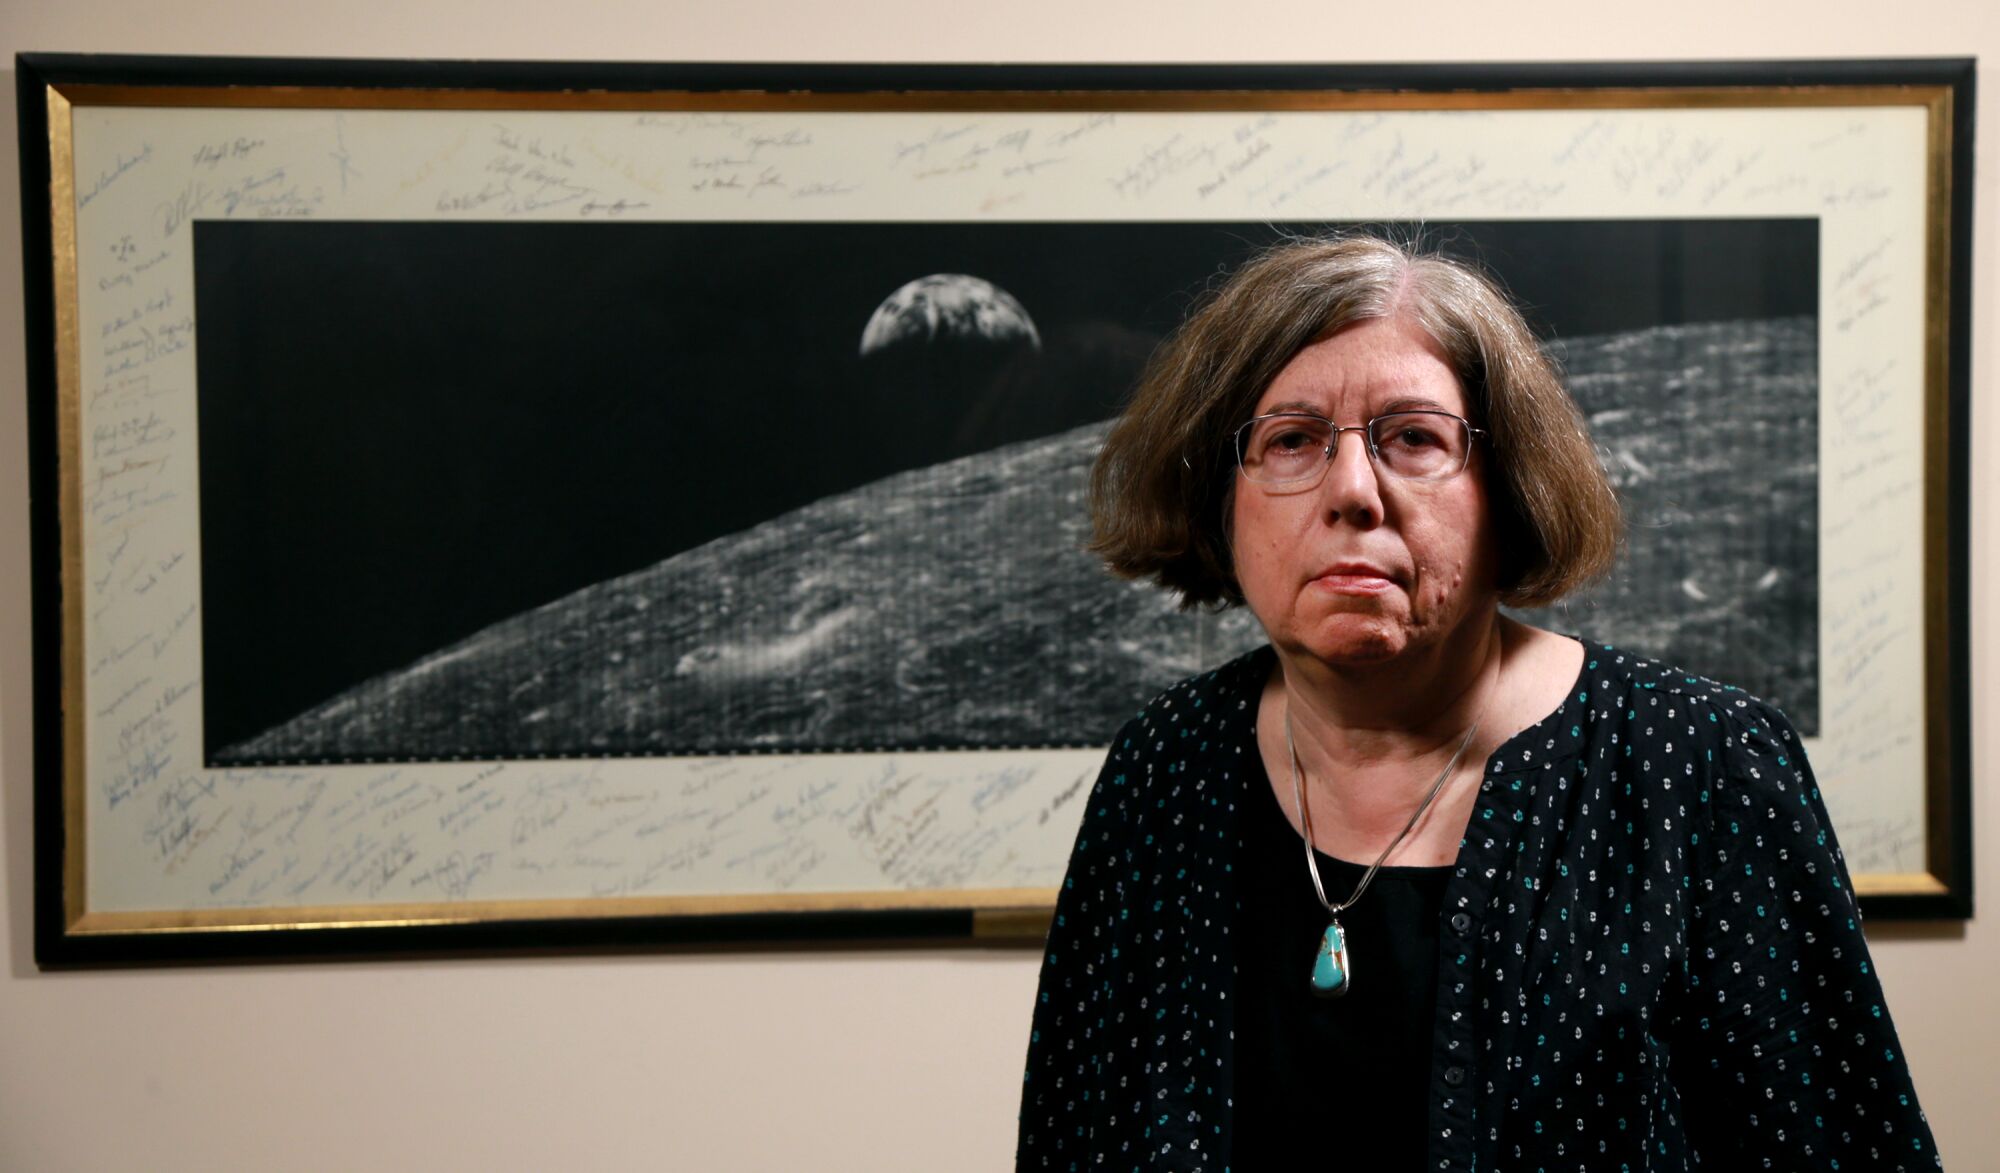 Judy Cook is the daughter of Abraham Silverstein, who was among a group of Jewish engineers who worked with former German rocket engineers under Adolf Hitler. Behind Cook is a photo of the Earth rising over the moon signed by fellow engineers.